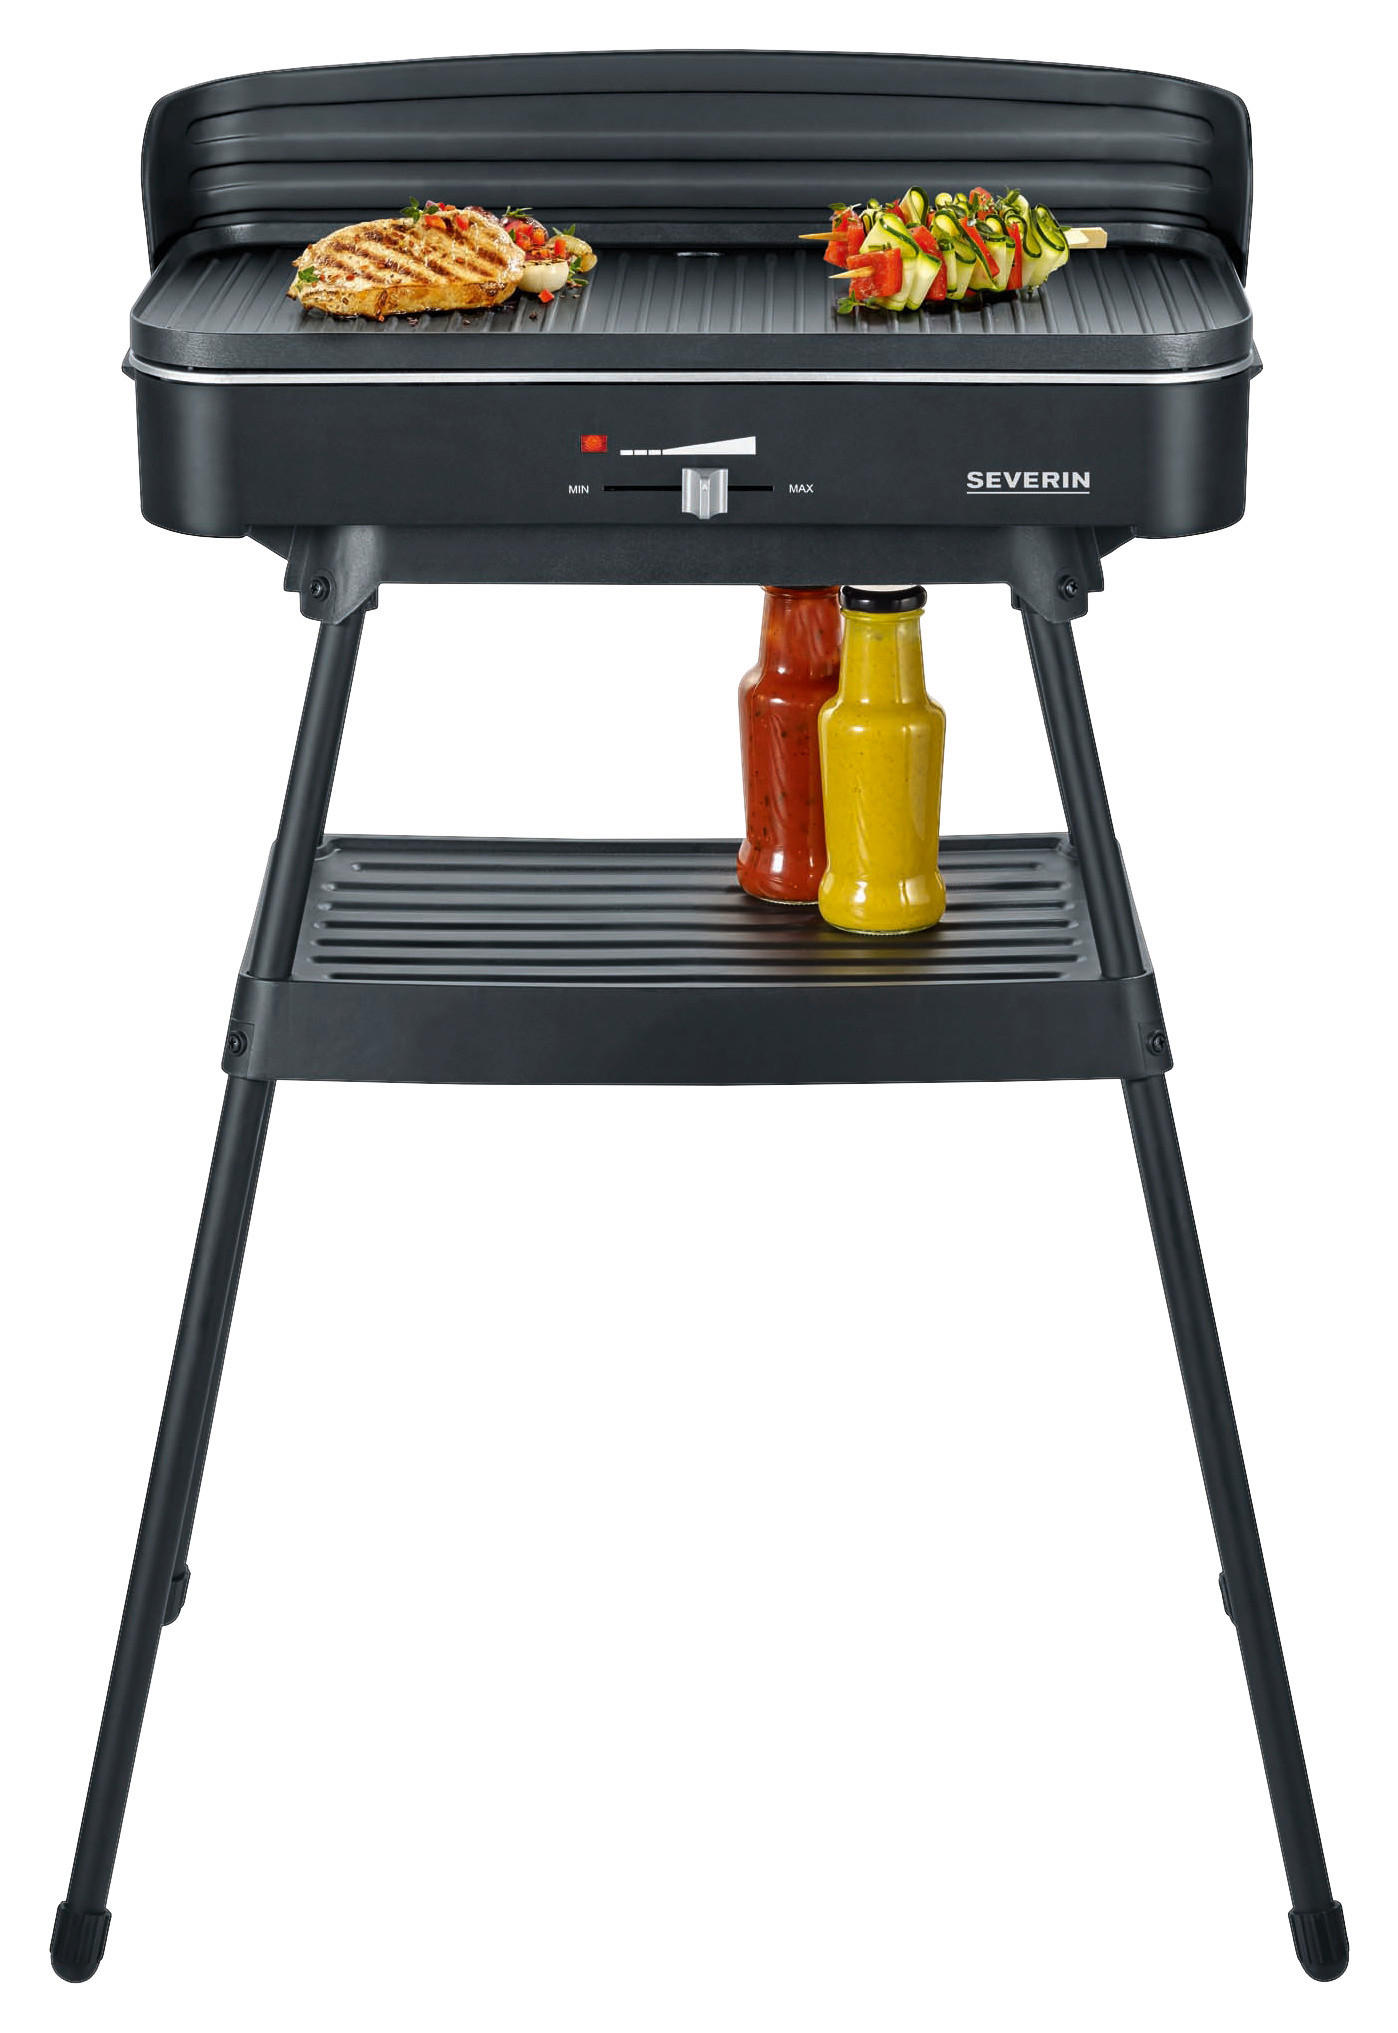 SEVERIN Barbeque-Grill PG8533 schwarz Kunststoff Metall B/H/T: ca. 52x11x28 cm Barbecue-Standgrill - schwarz (52,00/11,00/28,00cm)